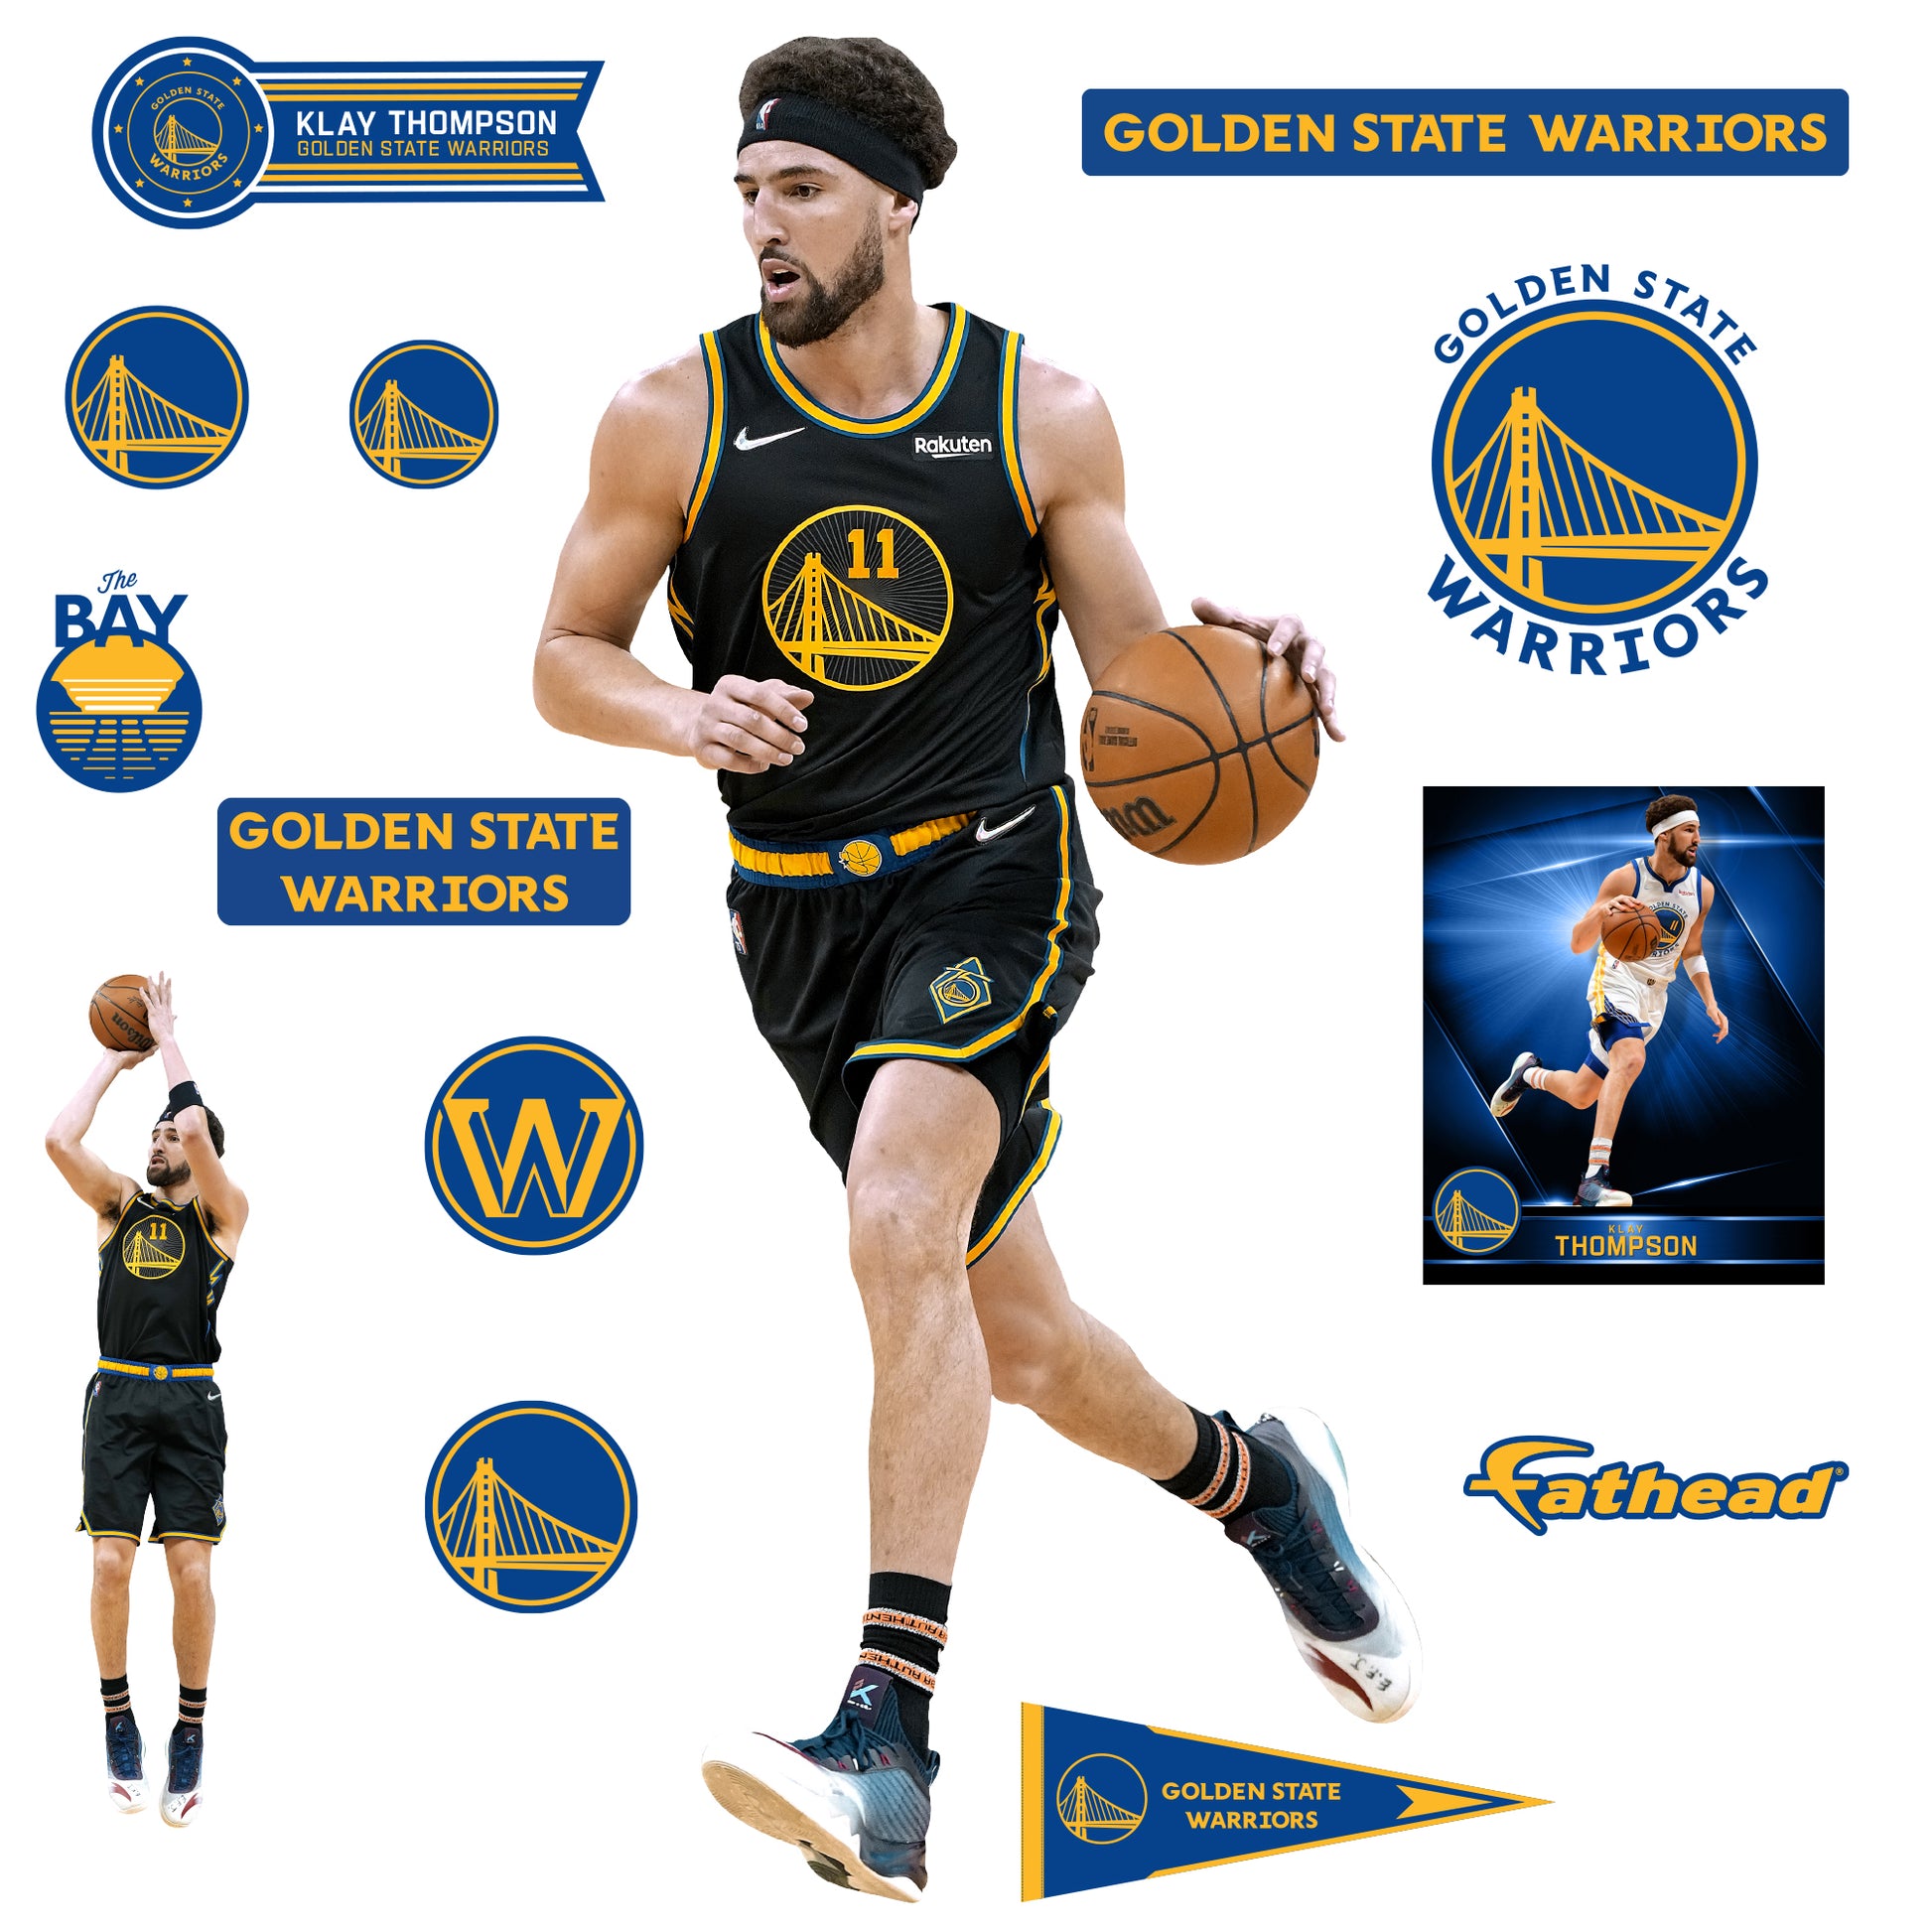 Golden State Warriors No.11 Klay Thompson Jersey